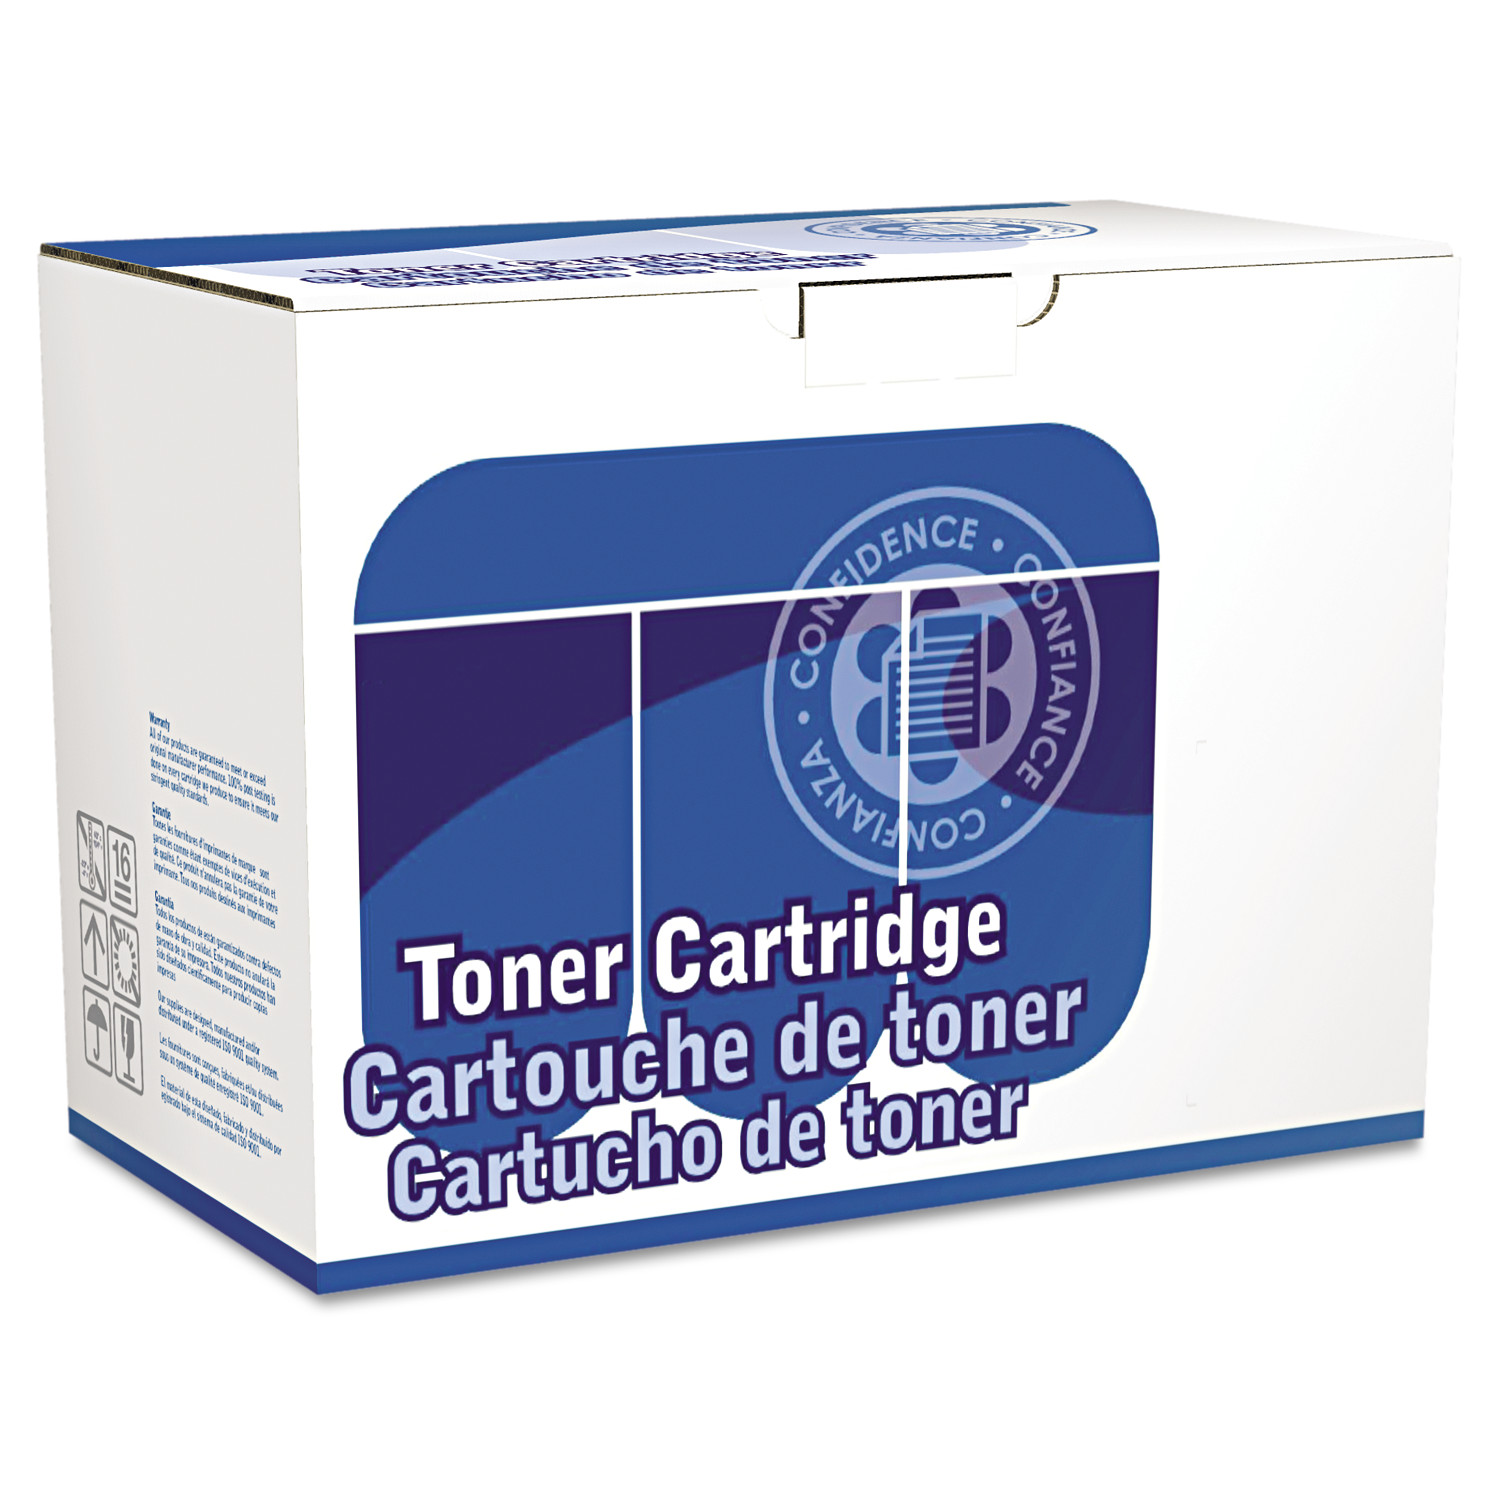 Dataproducts Remanufactured CE285A (85A) Toner, 1600 Page-Yield, Black - image 1 of 2